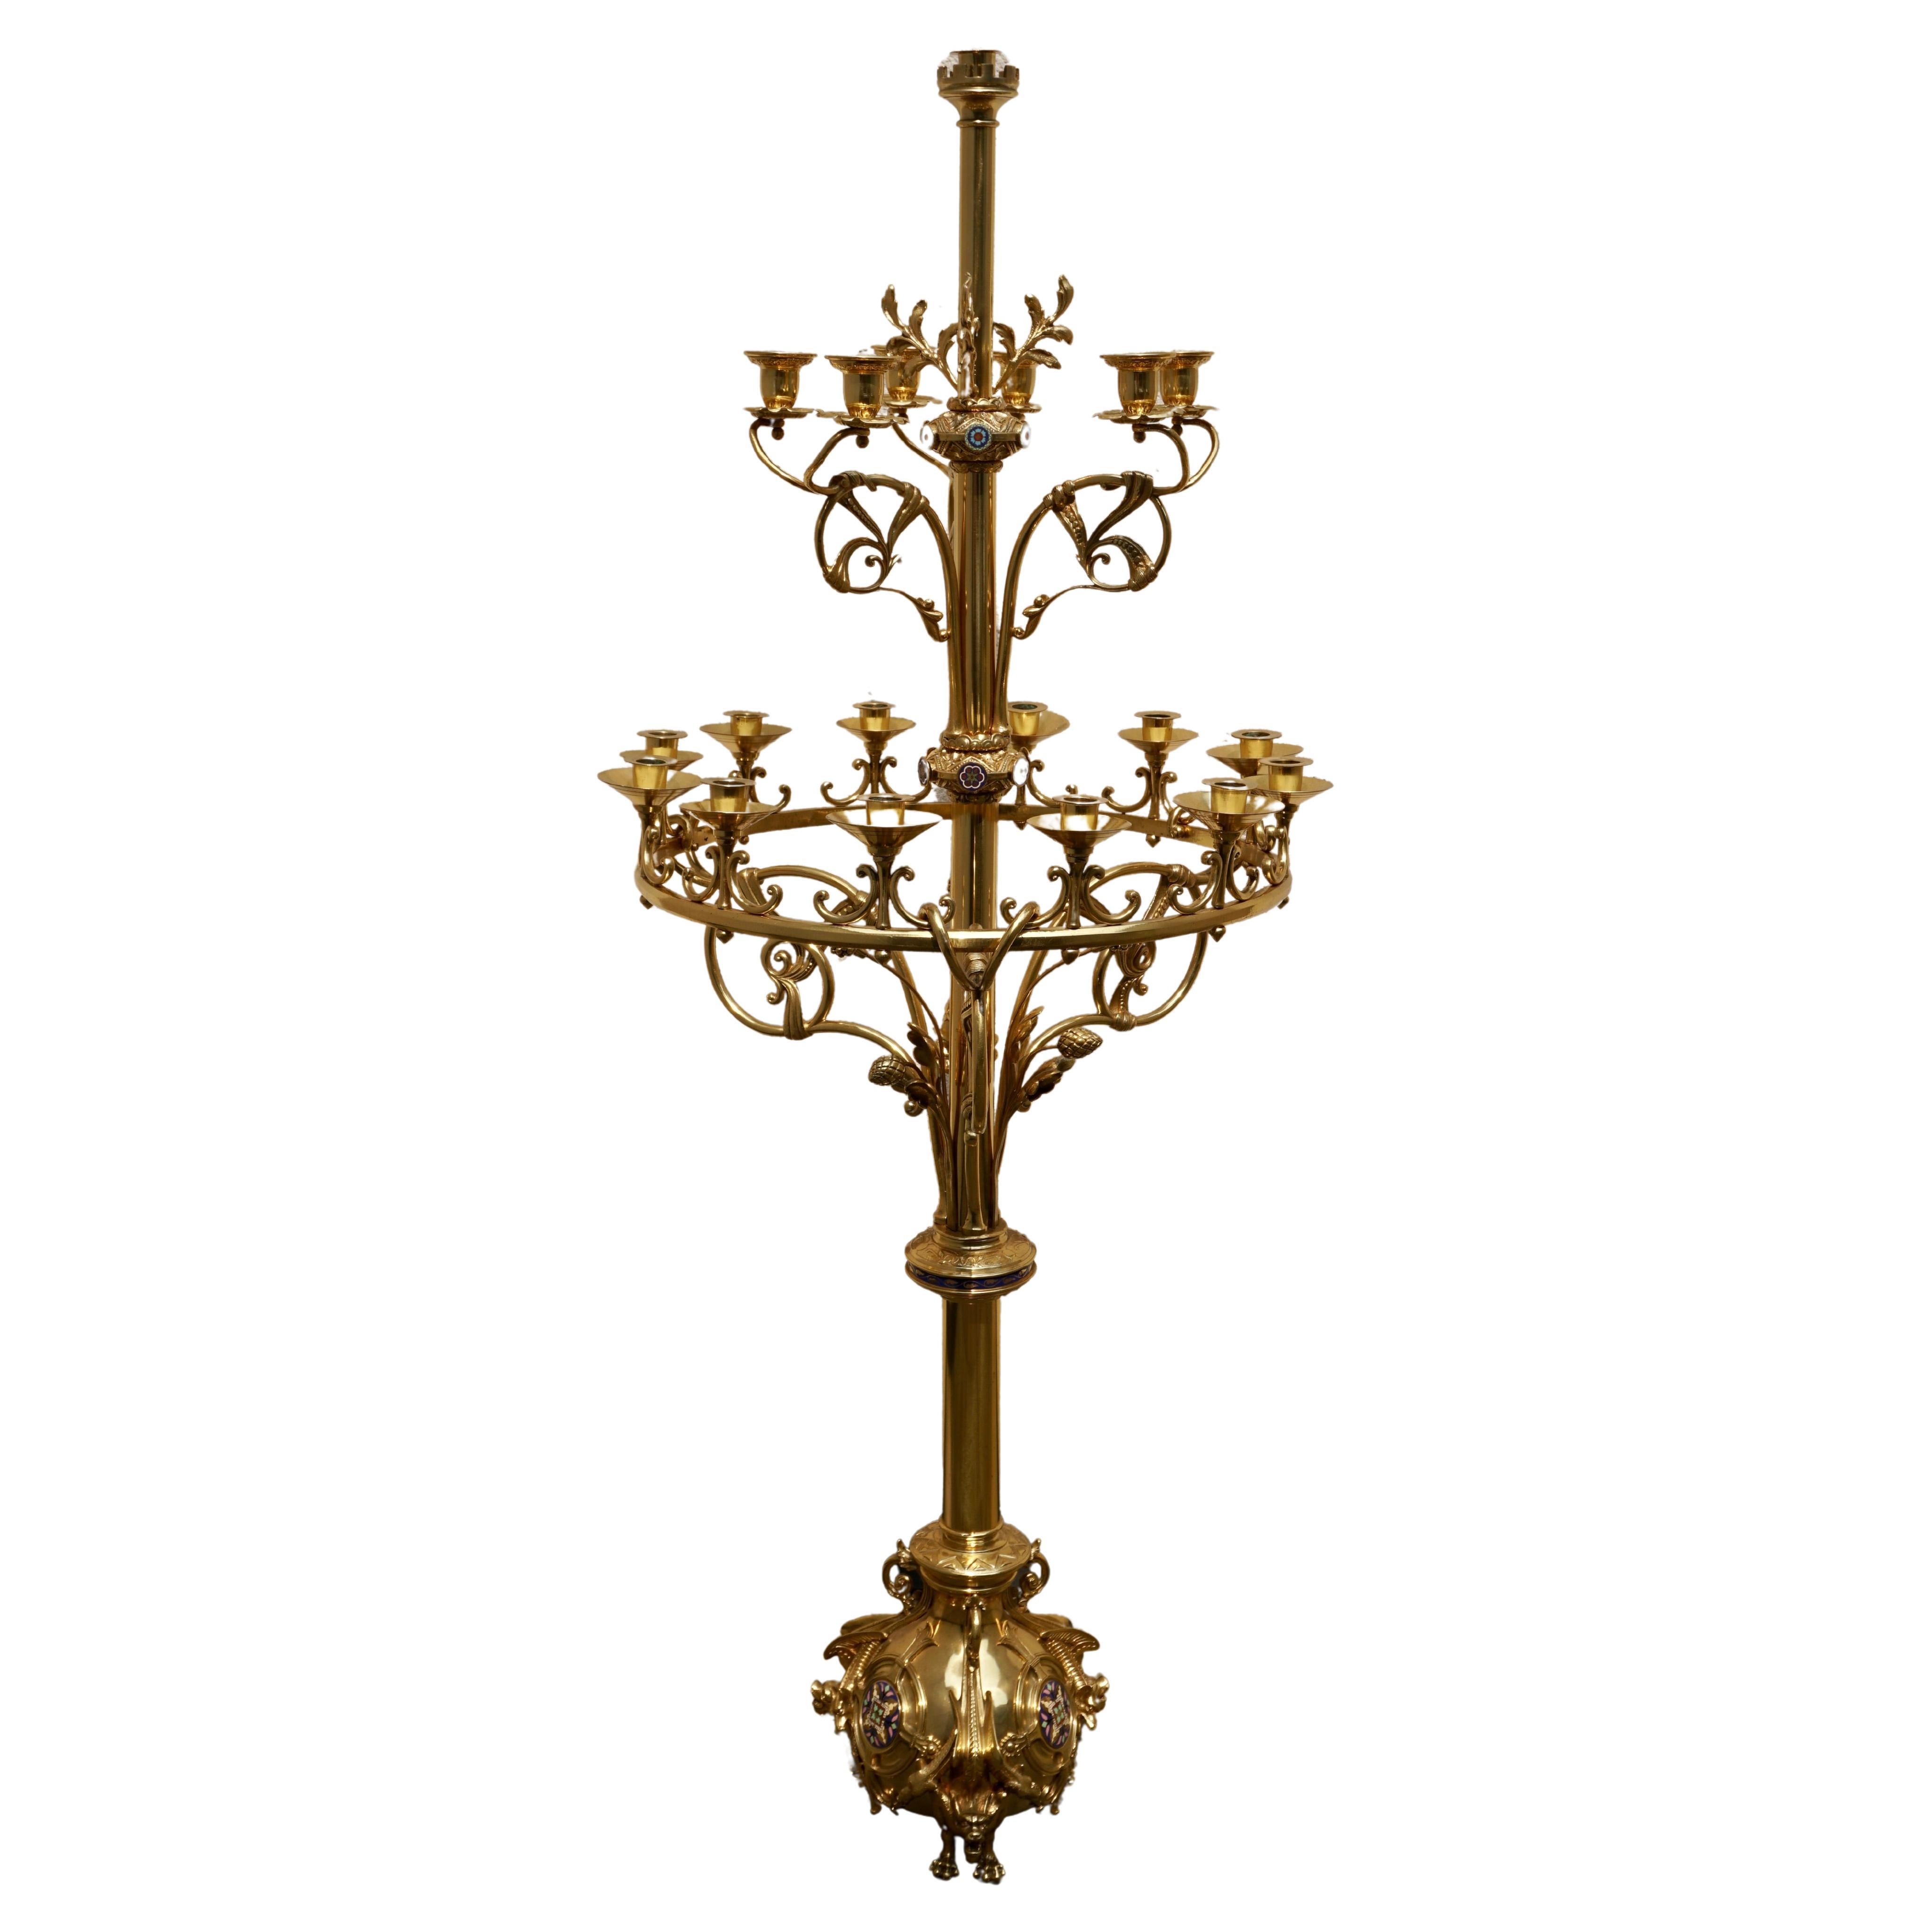 Brass and enamel multi-light standing candelabra in the Gothic style. The foot is bulbous scroll pattern with enamelled cartouches sitting on three mythical beasts. The candle holders are on two tiers with scroll patterns supporting.This is a